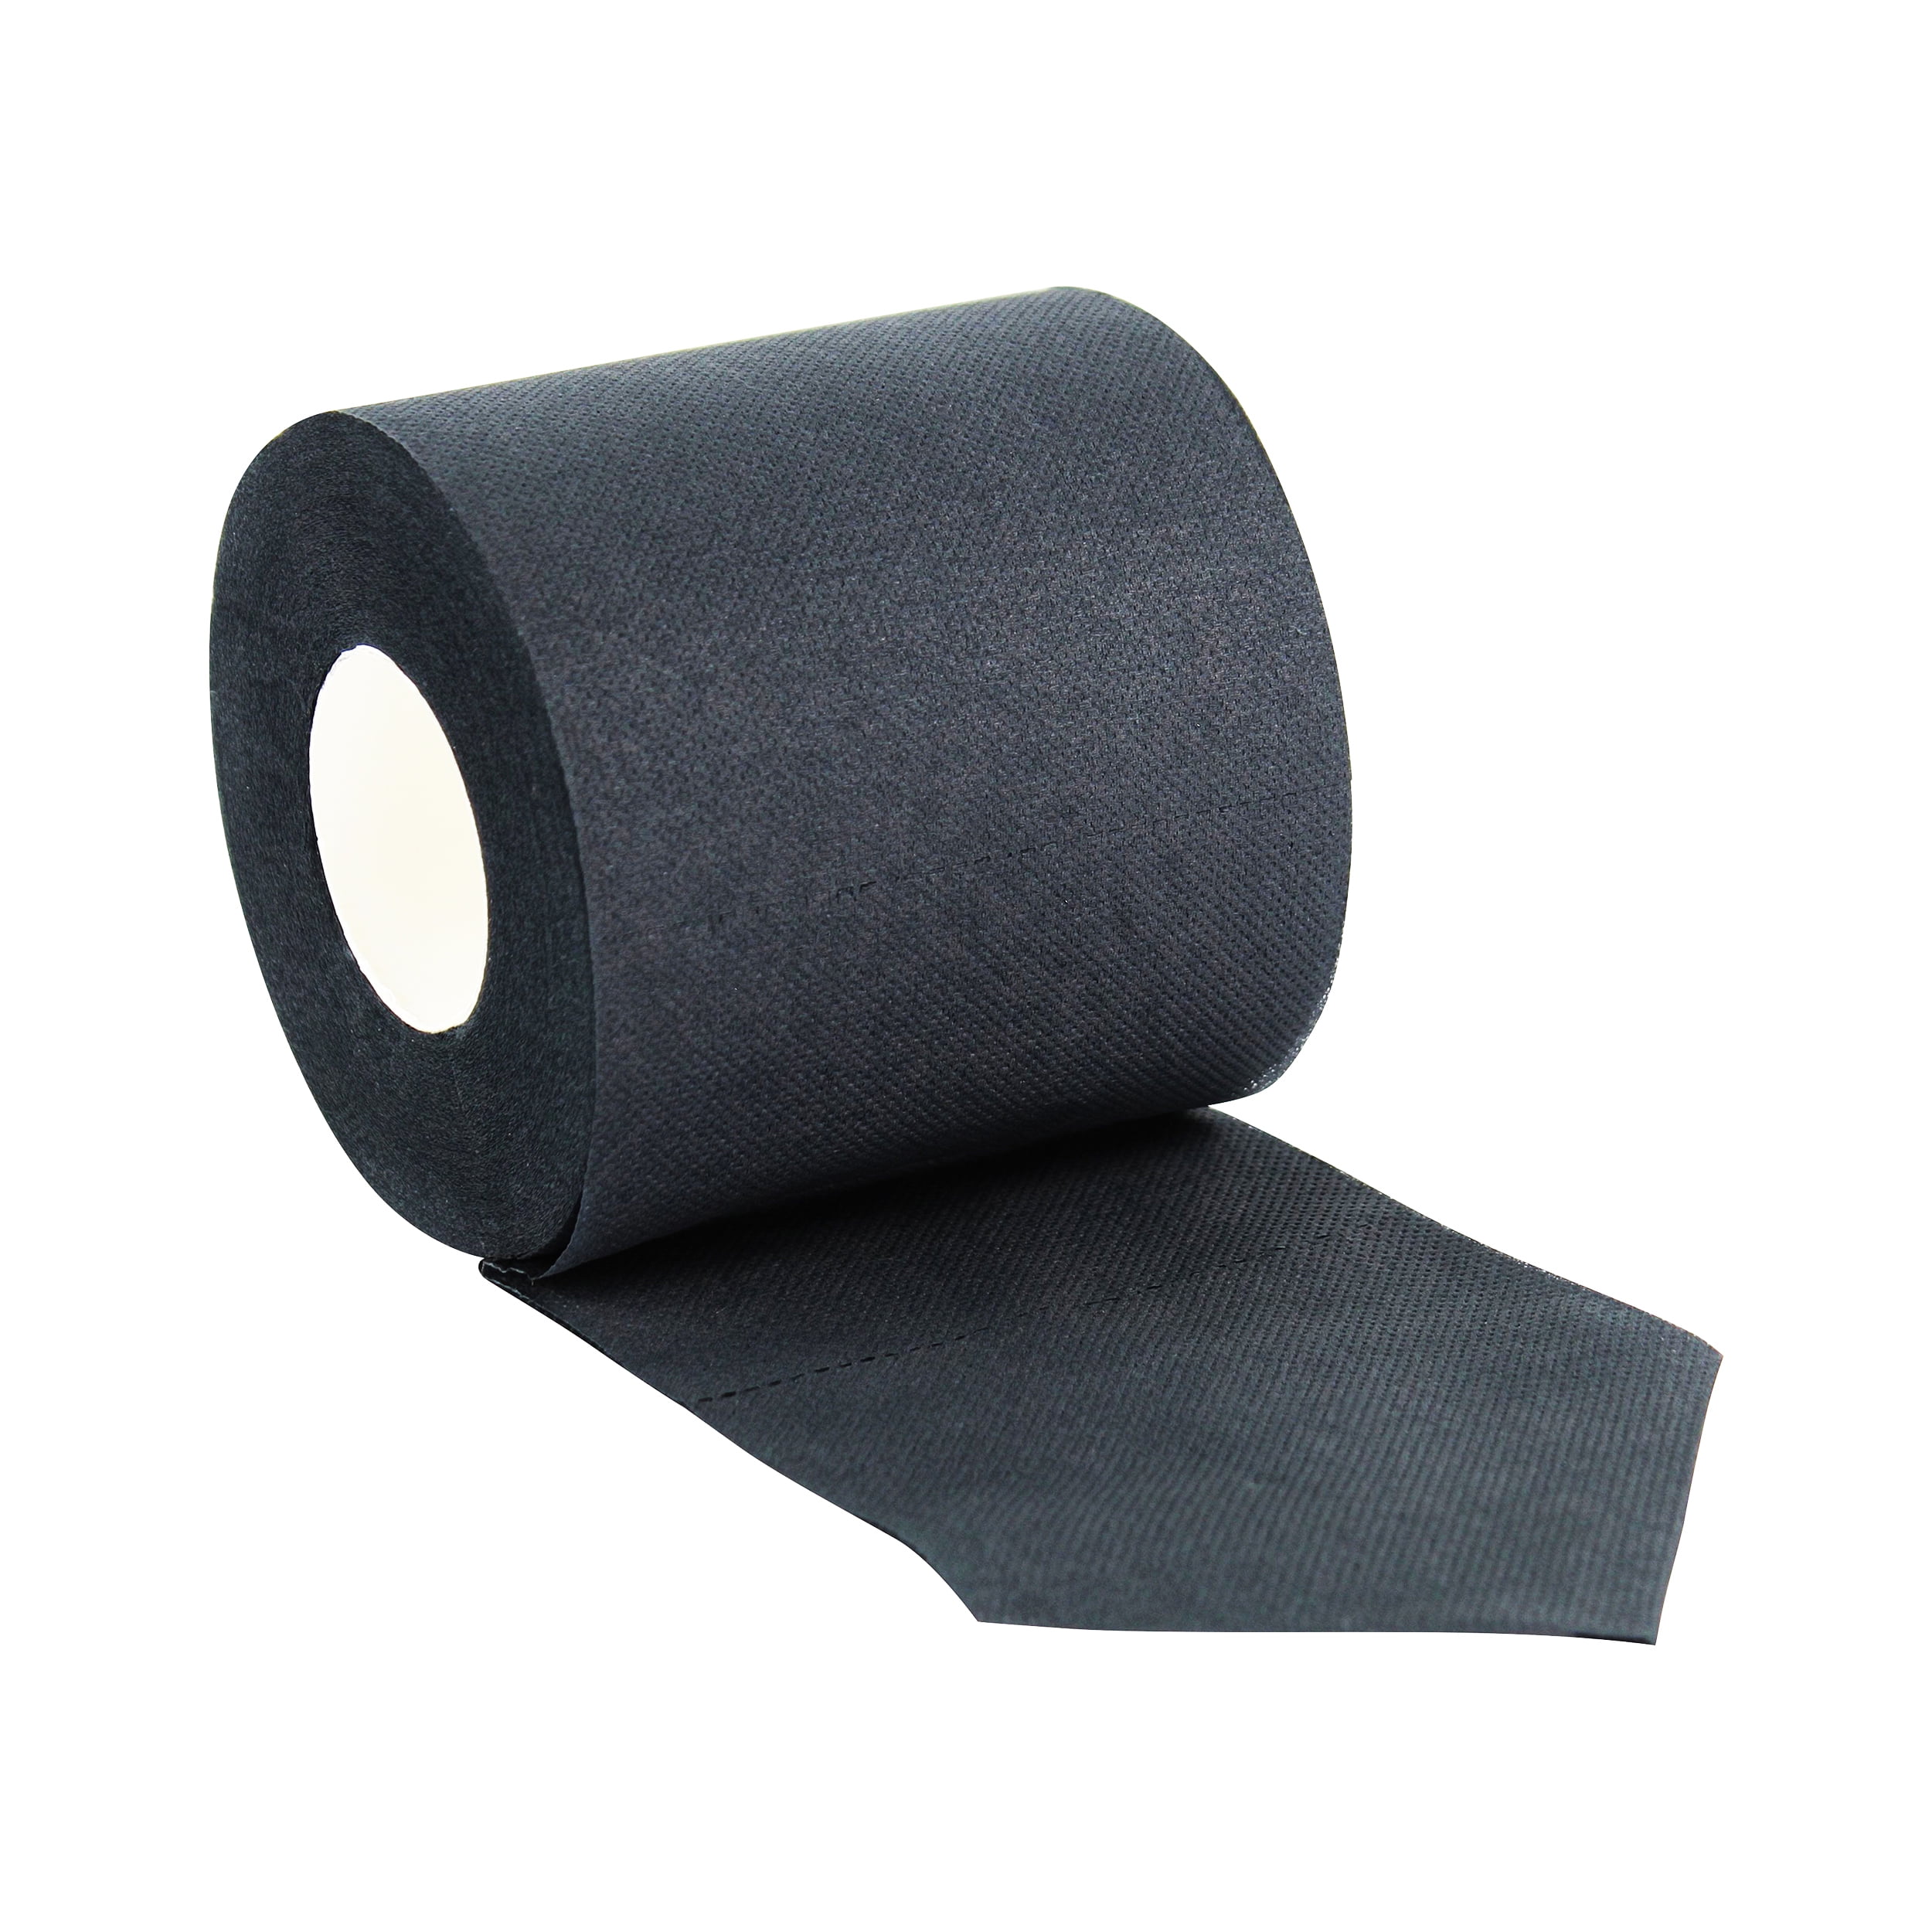 Mondo Medical 3 Ply Black Colored Bathroom Tissue Toilet Paper - 6 Roll Pack